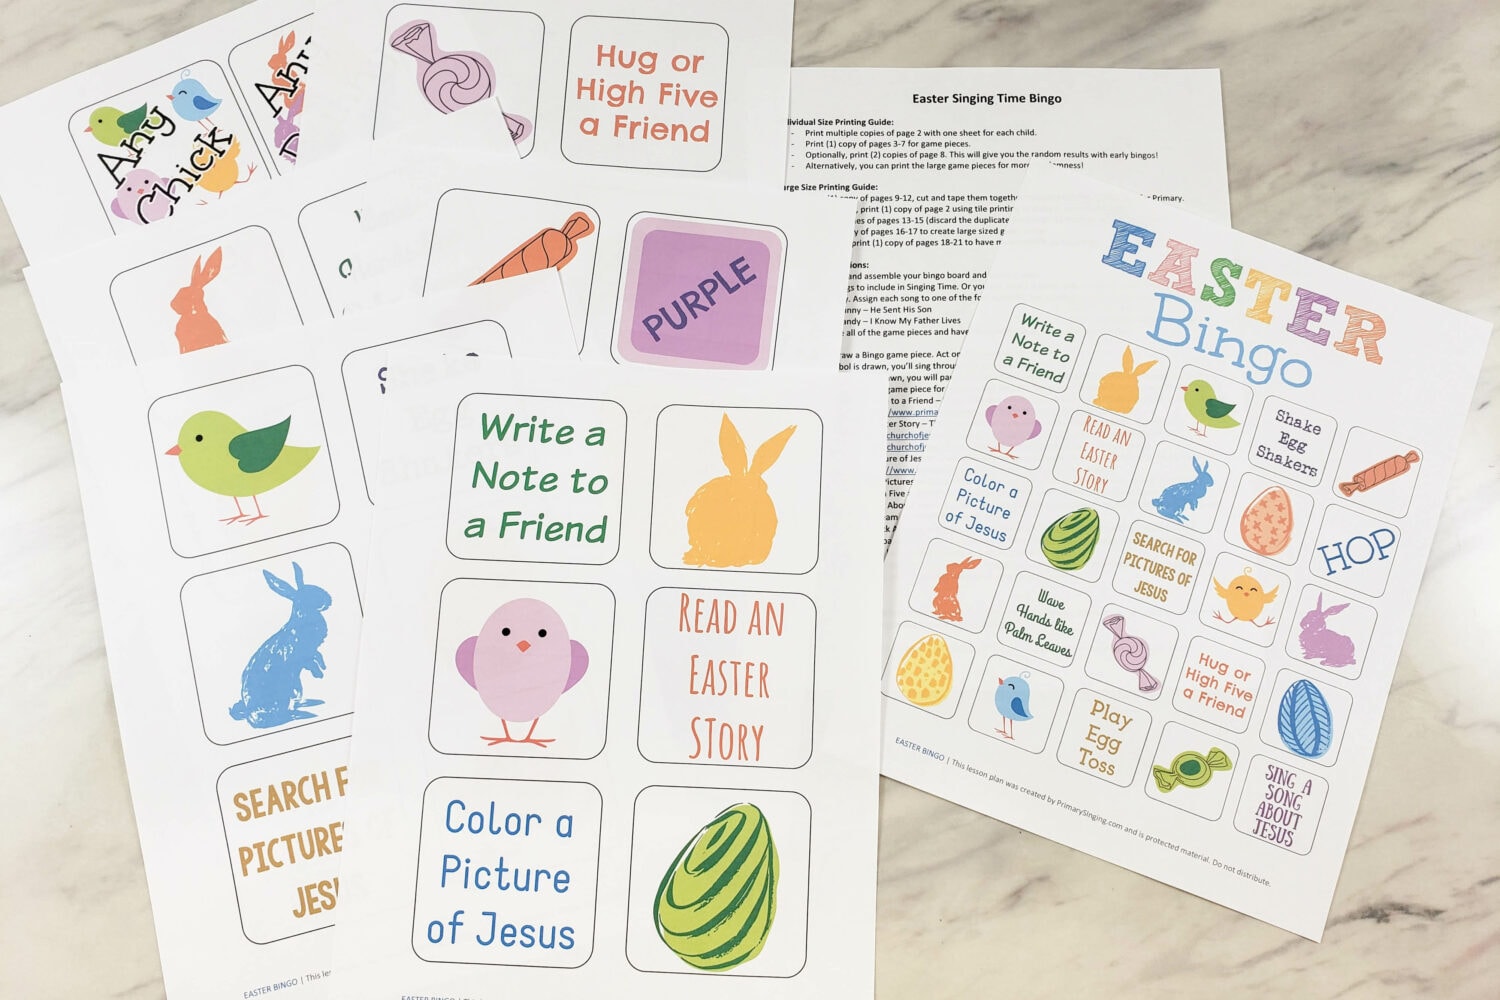 Easter bingo cards with printable game pieces for singing time music leaders